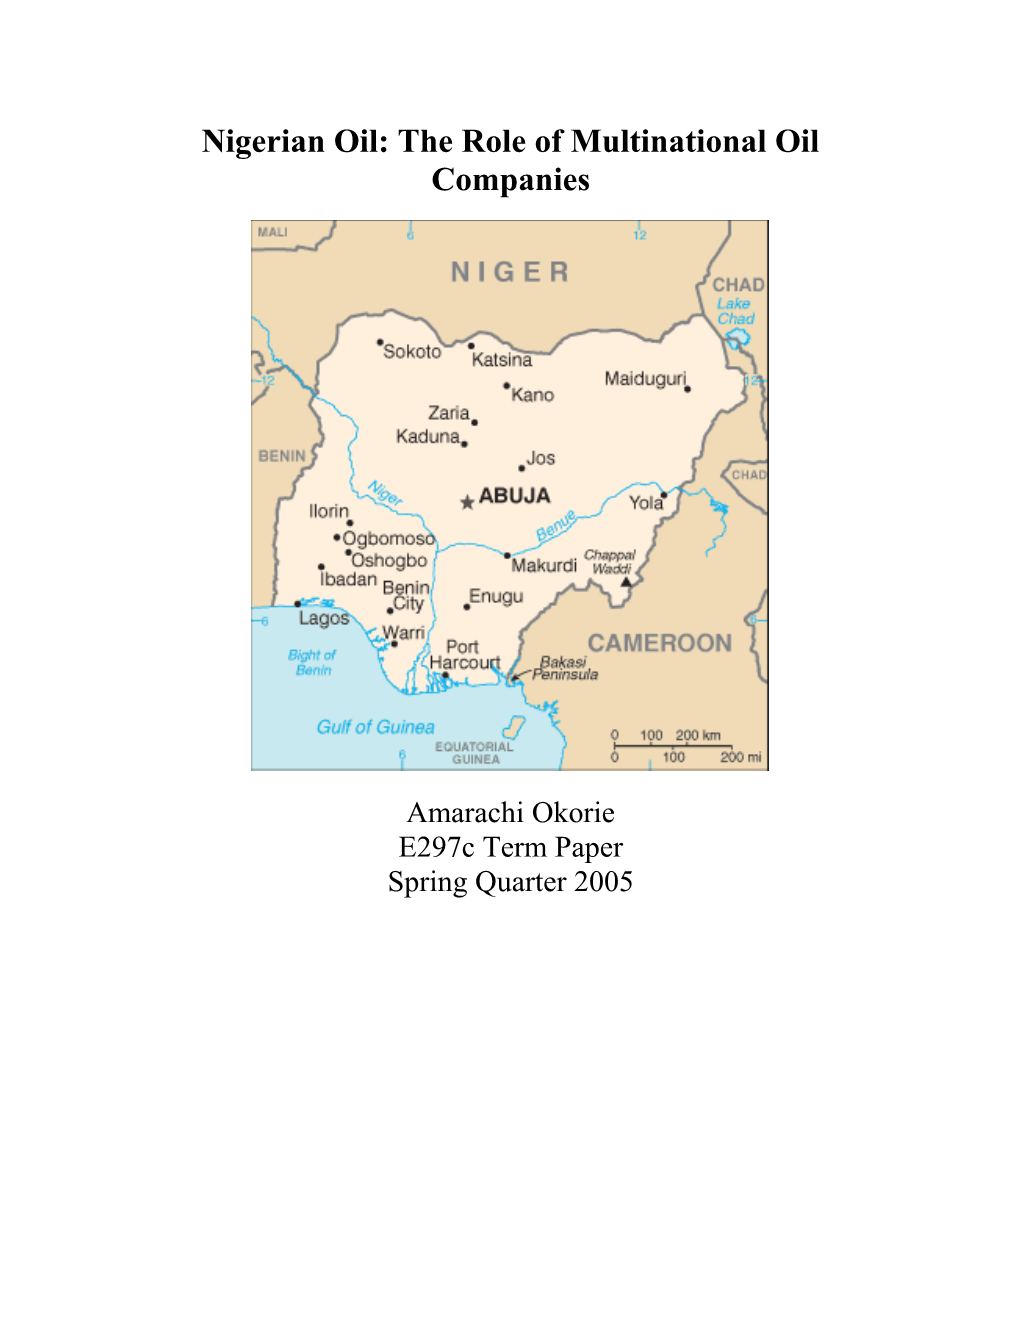 Nigerian Oil: the Role of Multinational Oil Companies